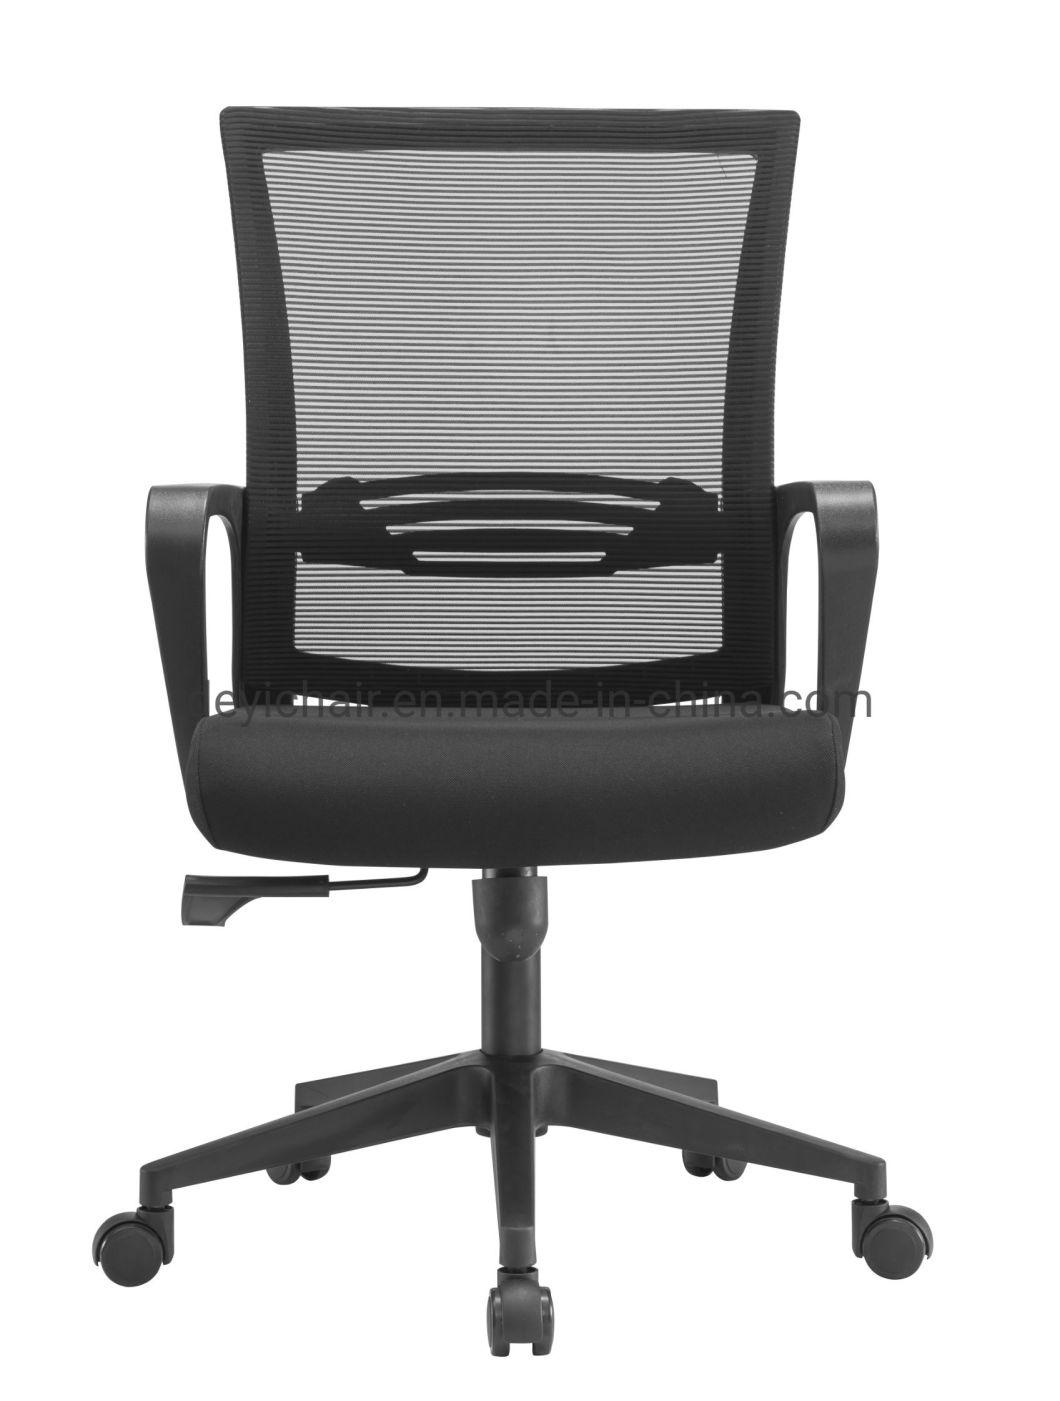 Middle Back with PP Fixed Arms Simple Mechanism Nylon Base with Headrest Mesh Upholstery and Fabric Cushion Seat Color Differentexecutive Chair